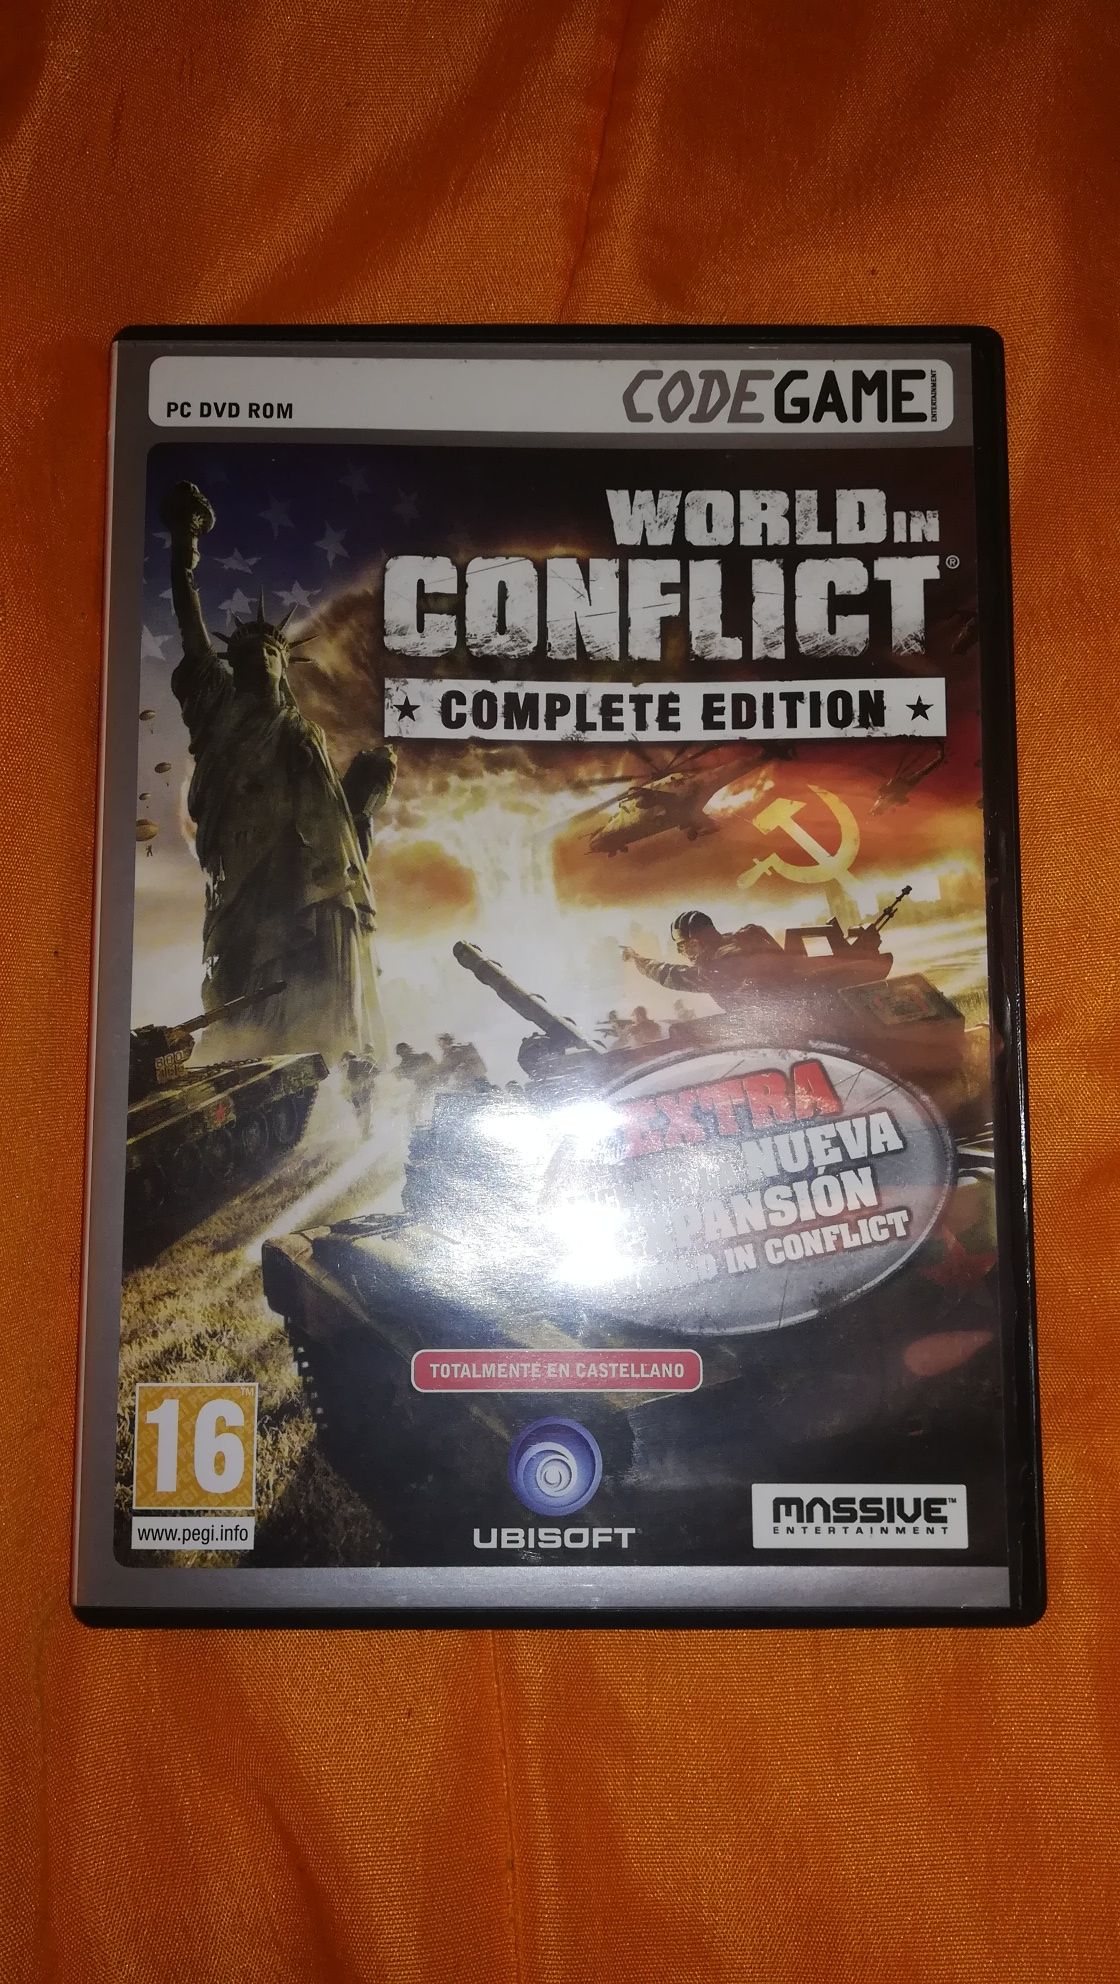 World in Conflict Complete Edition - PC-DVD-ROM